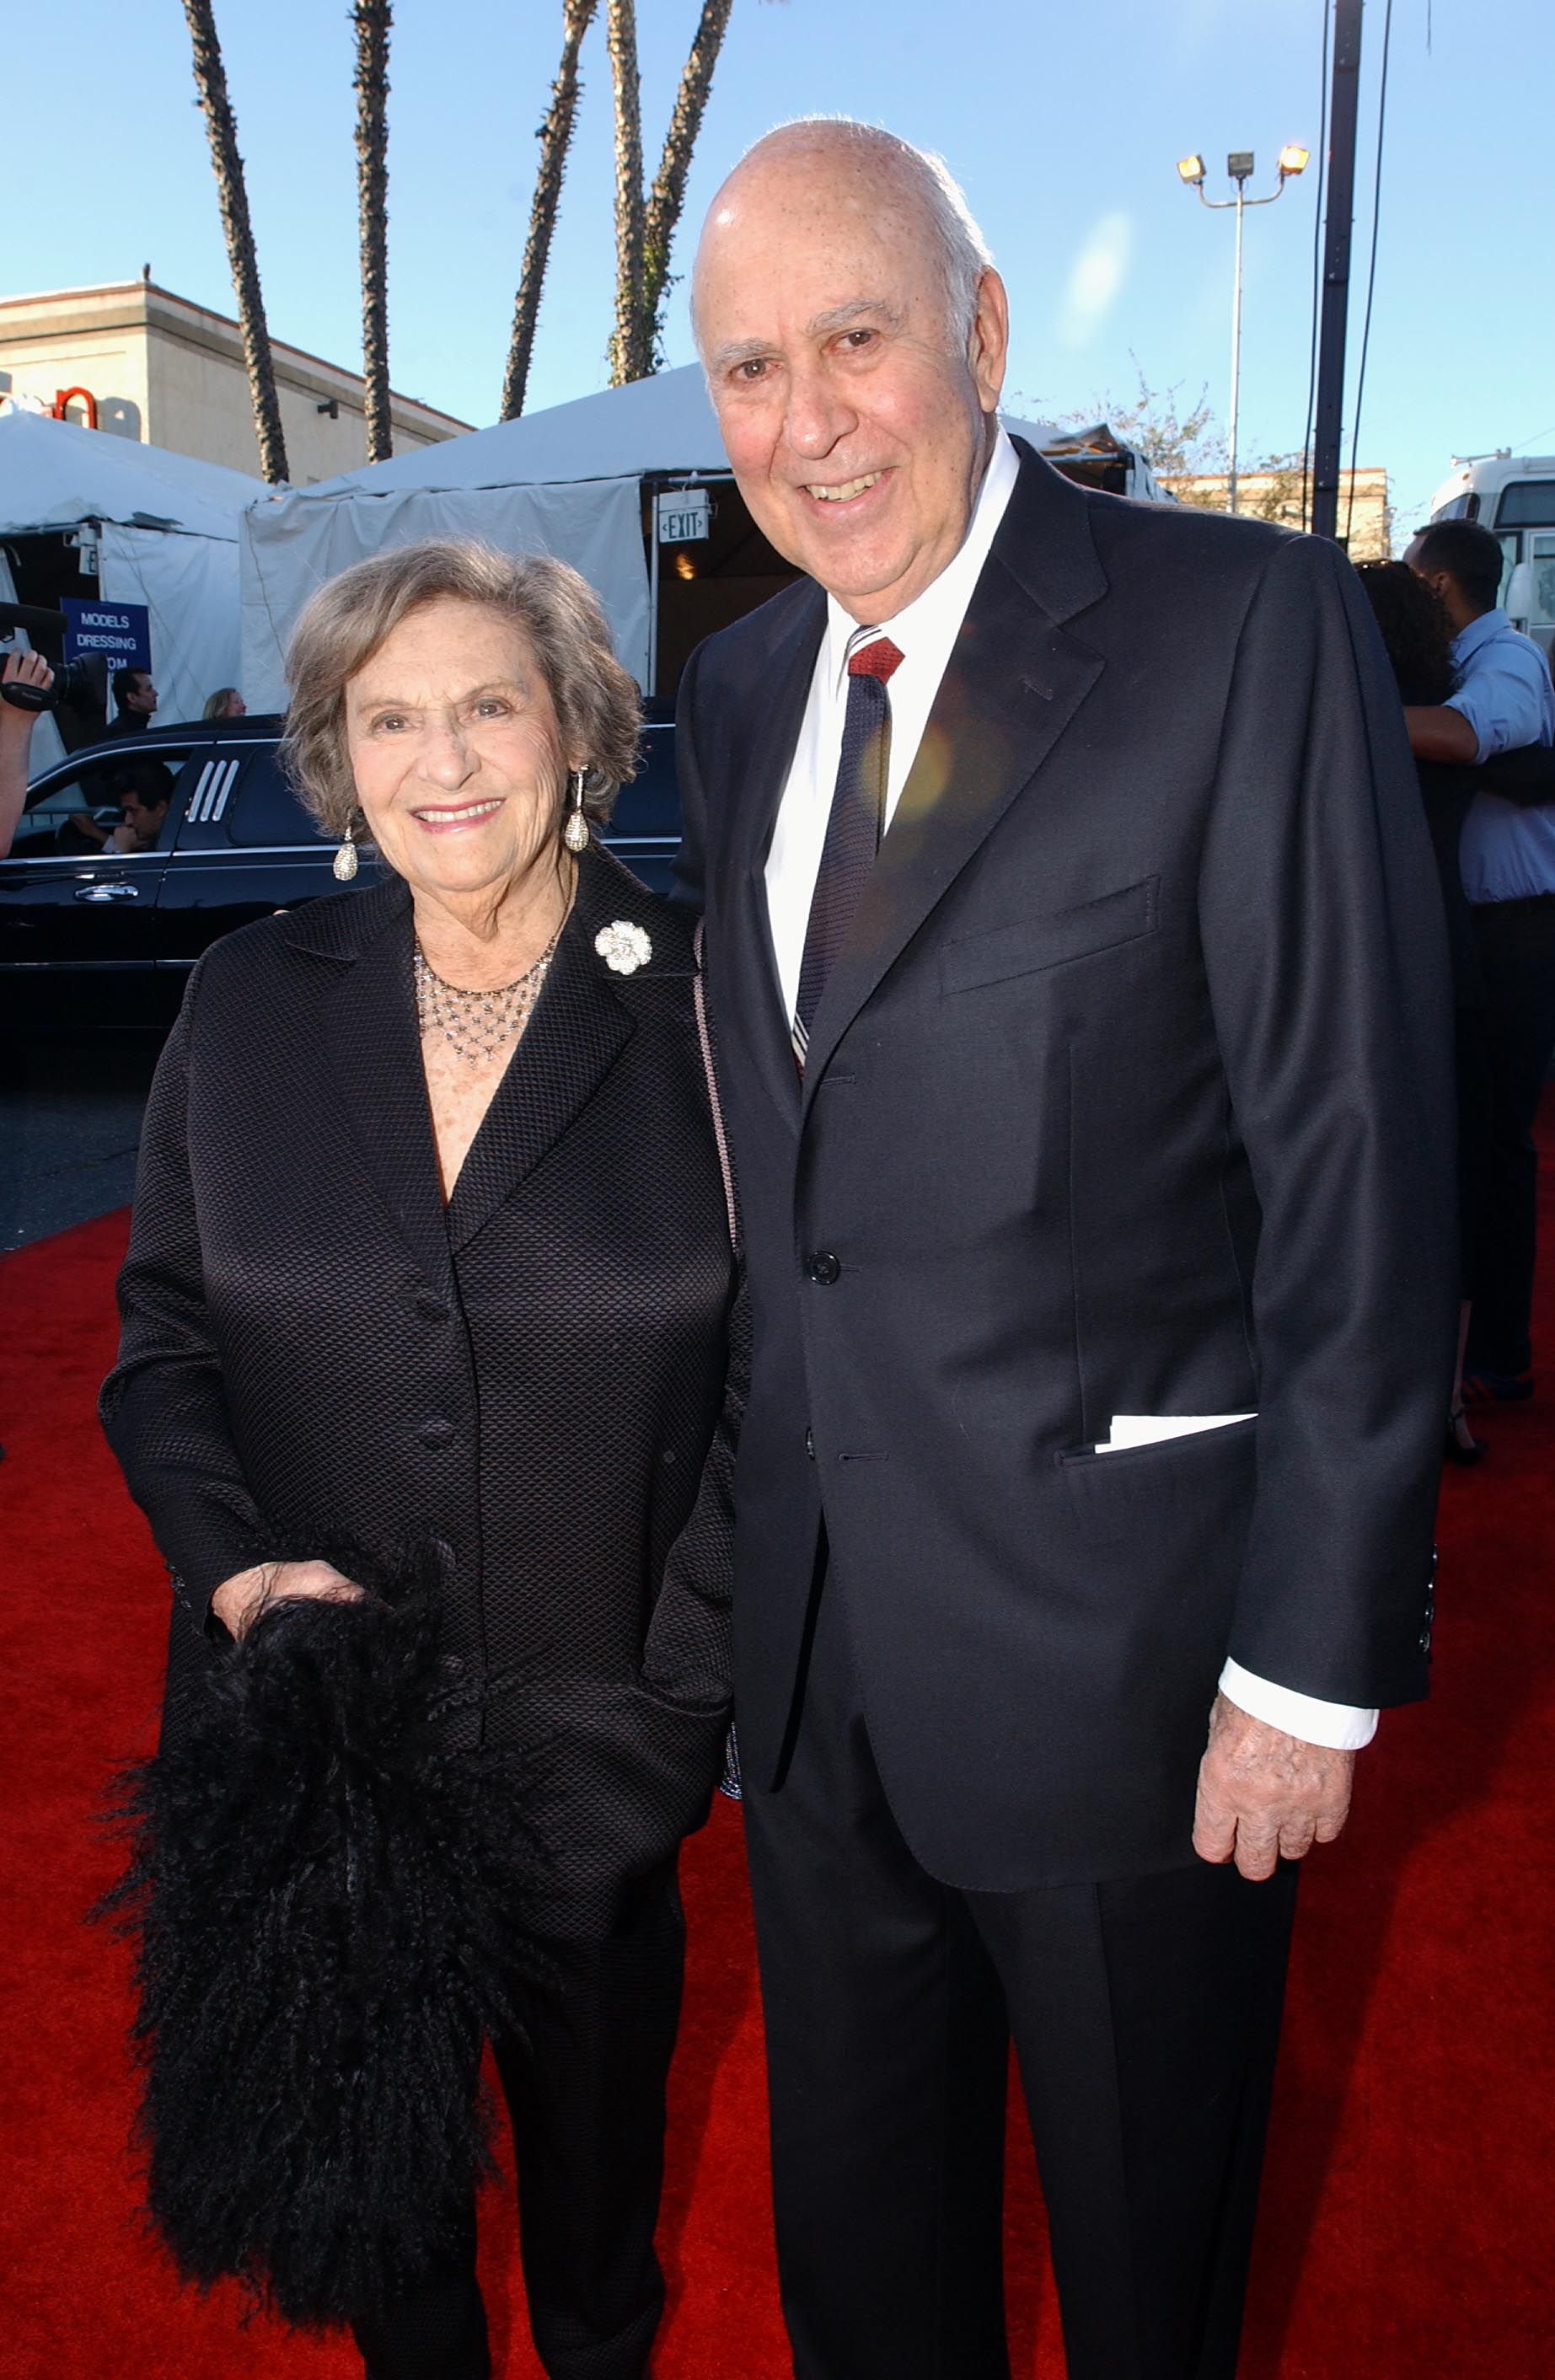 Late Carl Reiner and wife Estelle at the TV Land Awards 2003 at the Hollywood Palladium on March 2, 2003 in Hollywood, California | Photo: Getty Images